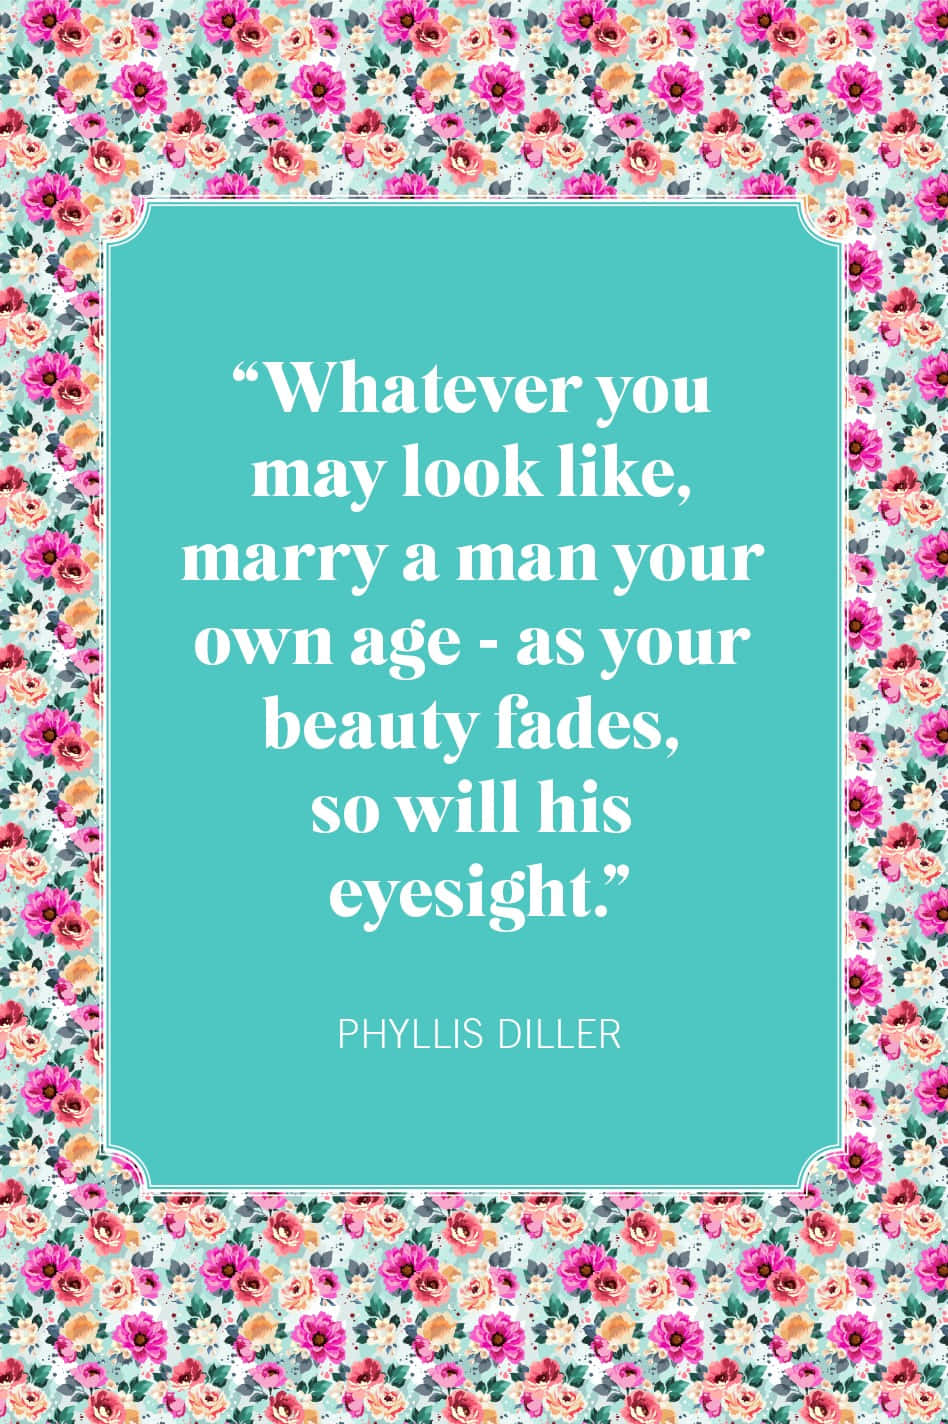 Humorous Marriage Advice Quote Phyllis Diller Wallpaper